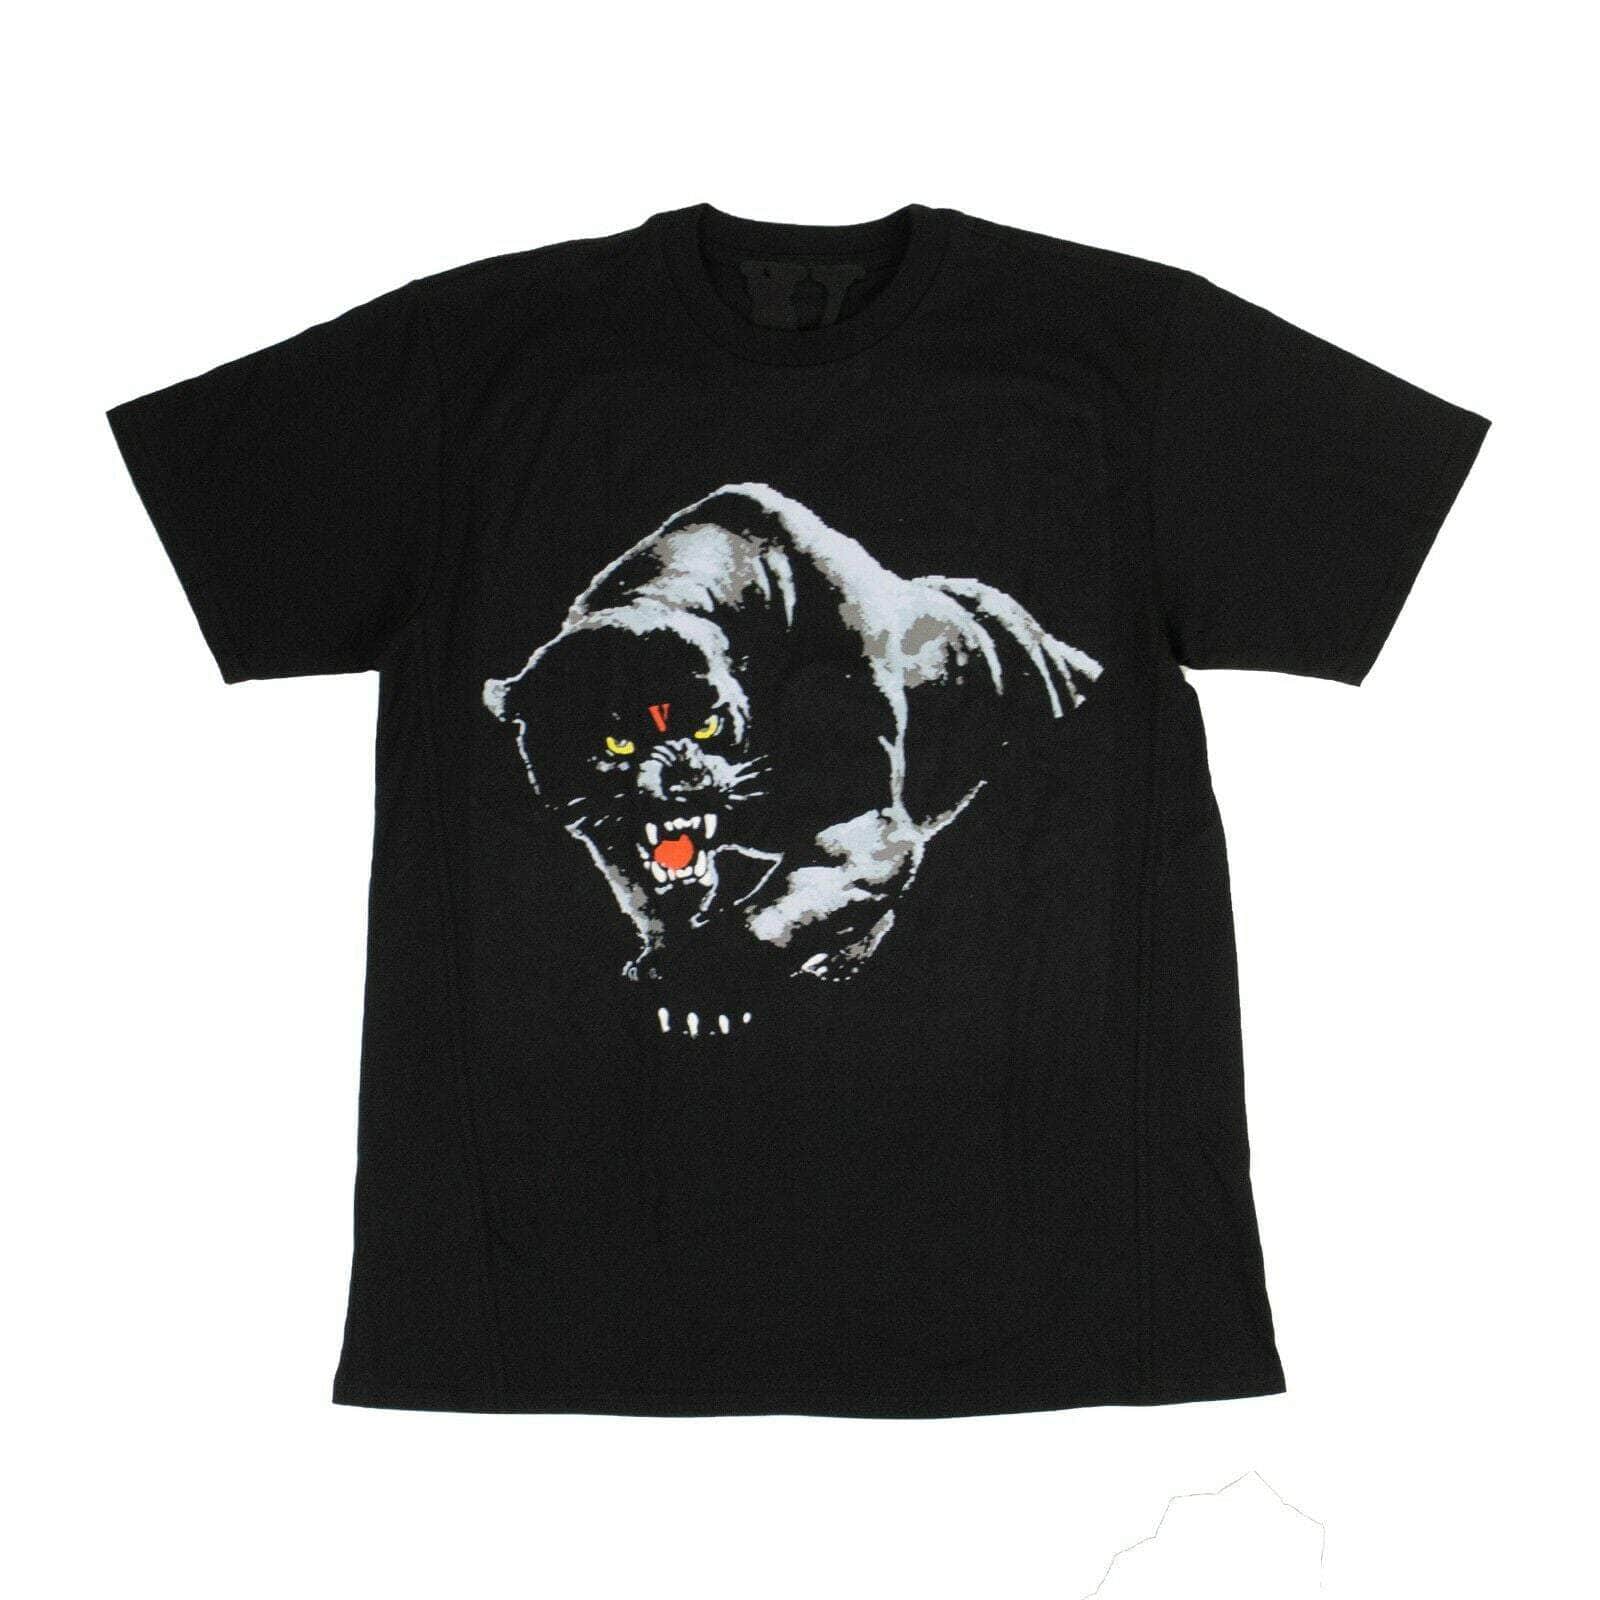 Vlone 250-500, chicmi, couponcollection, gender-mens, main-clothing, mens-shoes, size-s, t-shirt, vlone S Short Sleeves Panther T-Shirt - Black 83V-1030/S 83V-1030/S